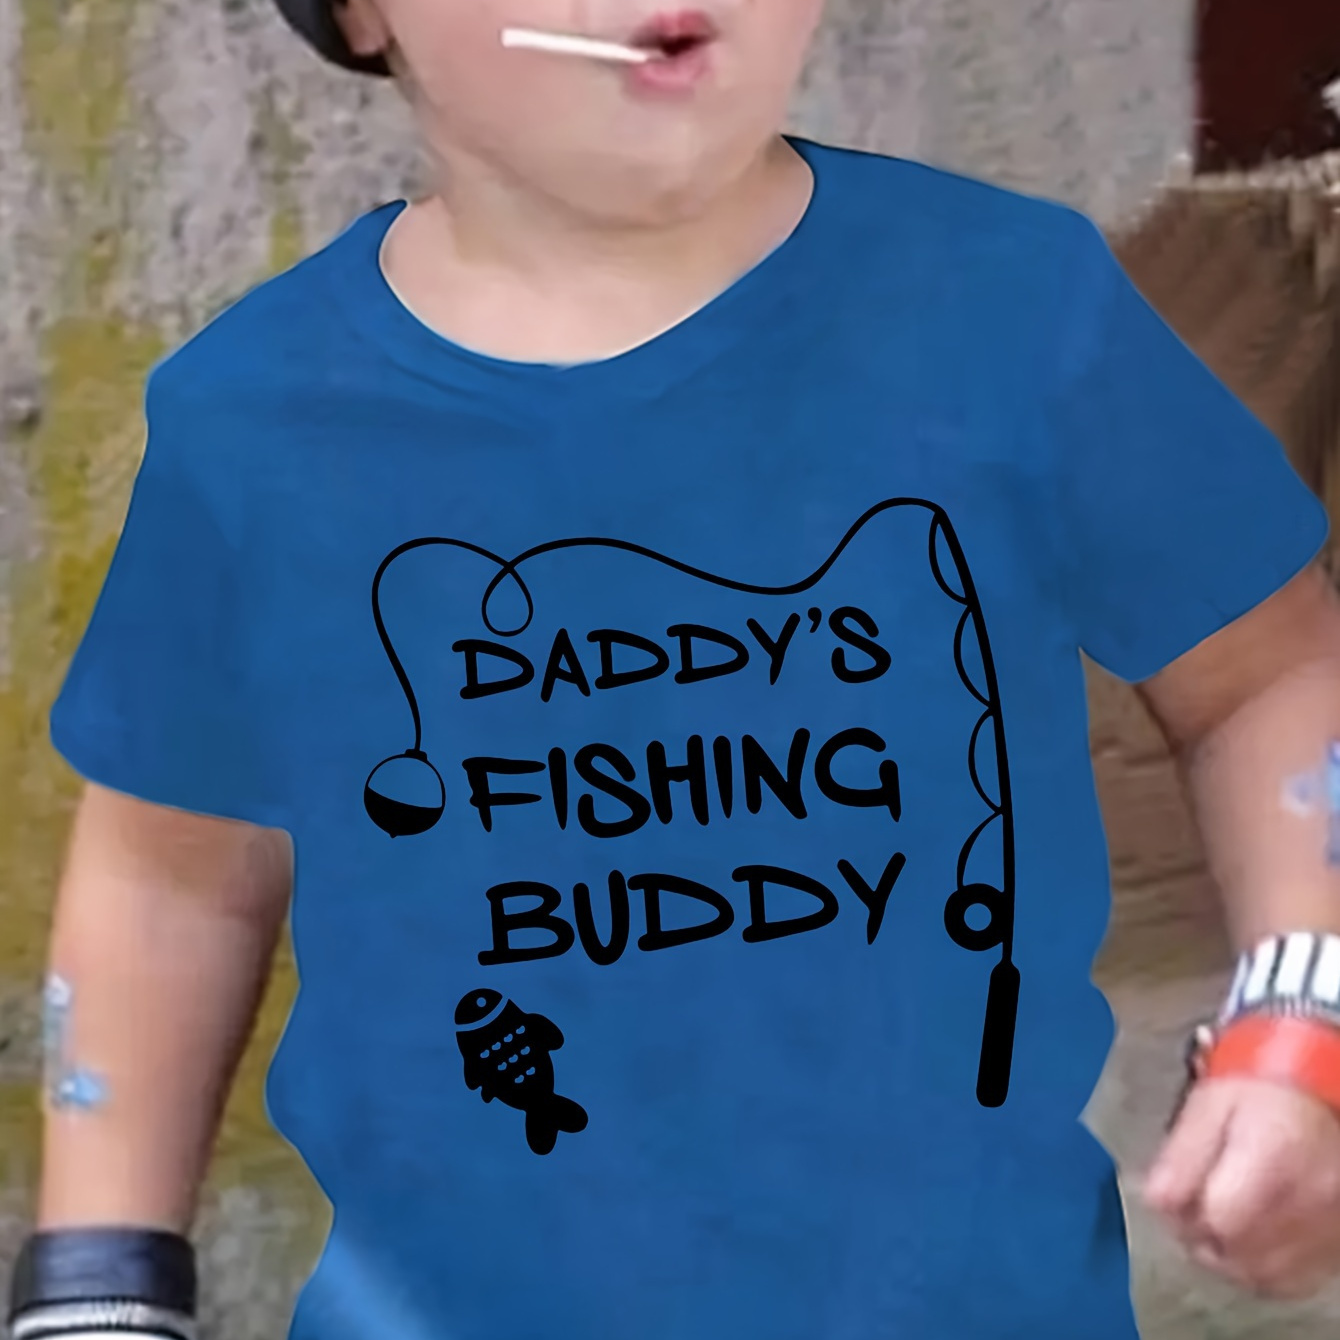 

Daddy's Fishing Buddy Print Boys Creative T-shirt, Trendy Versatile & Comfortable Short Sleeve Tee For Toddler Kids, As Gift